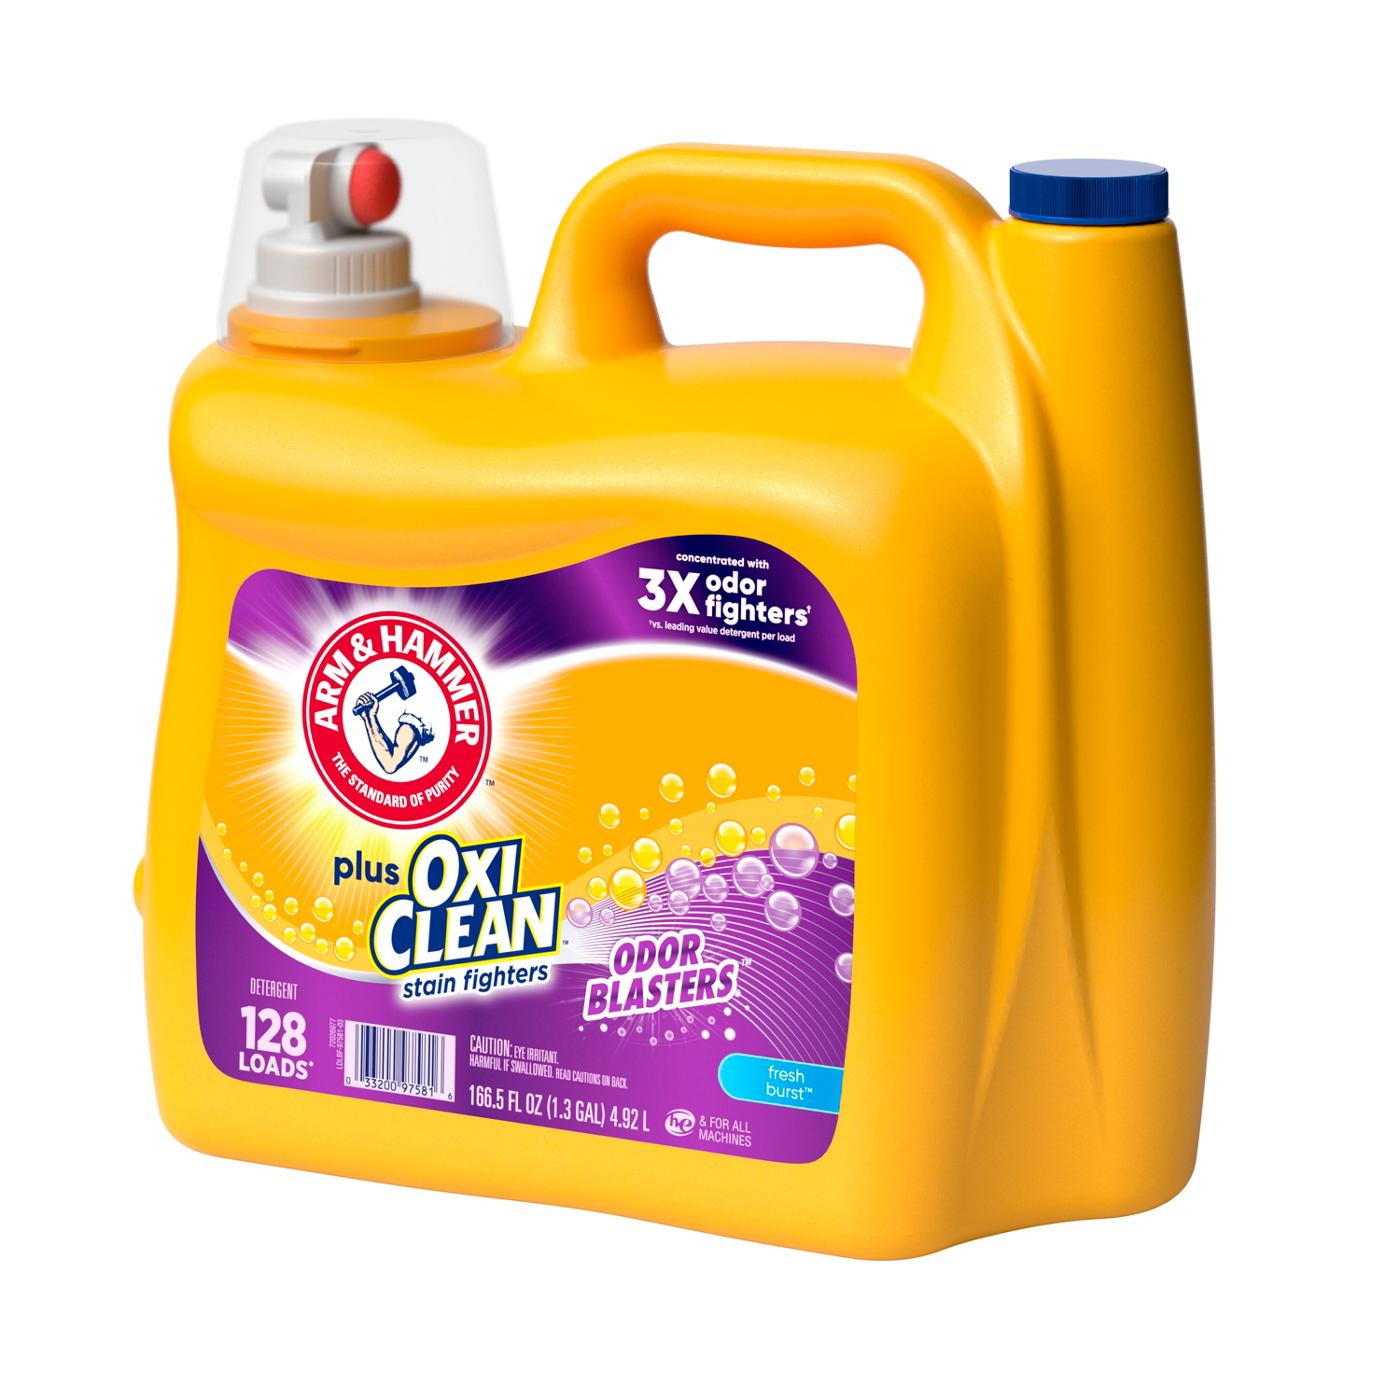 OxiClean Total Interior Cabin & Air Vent Cleaner - Shop Automotive Cleaners  at H-E-B